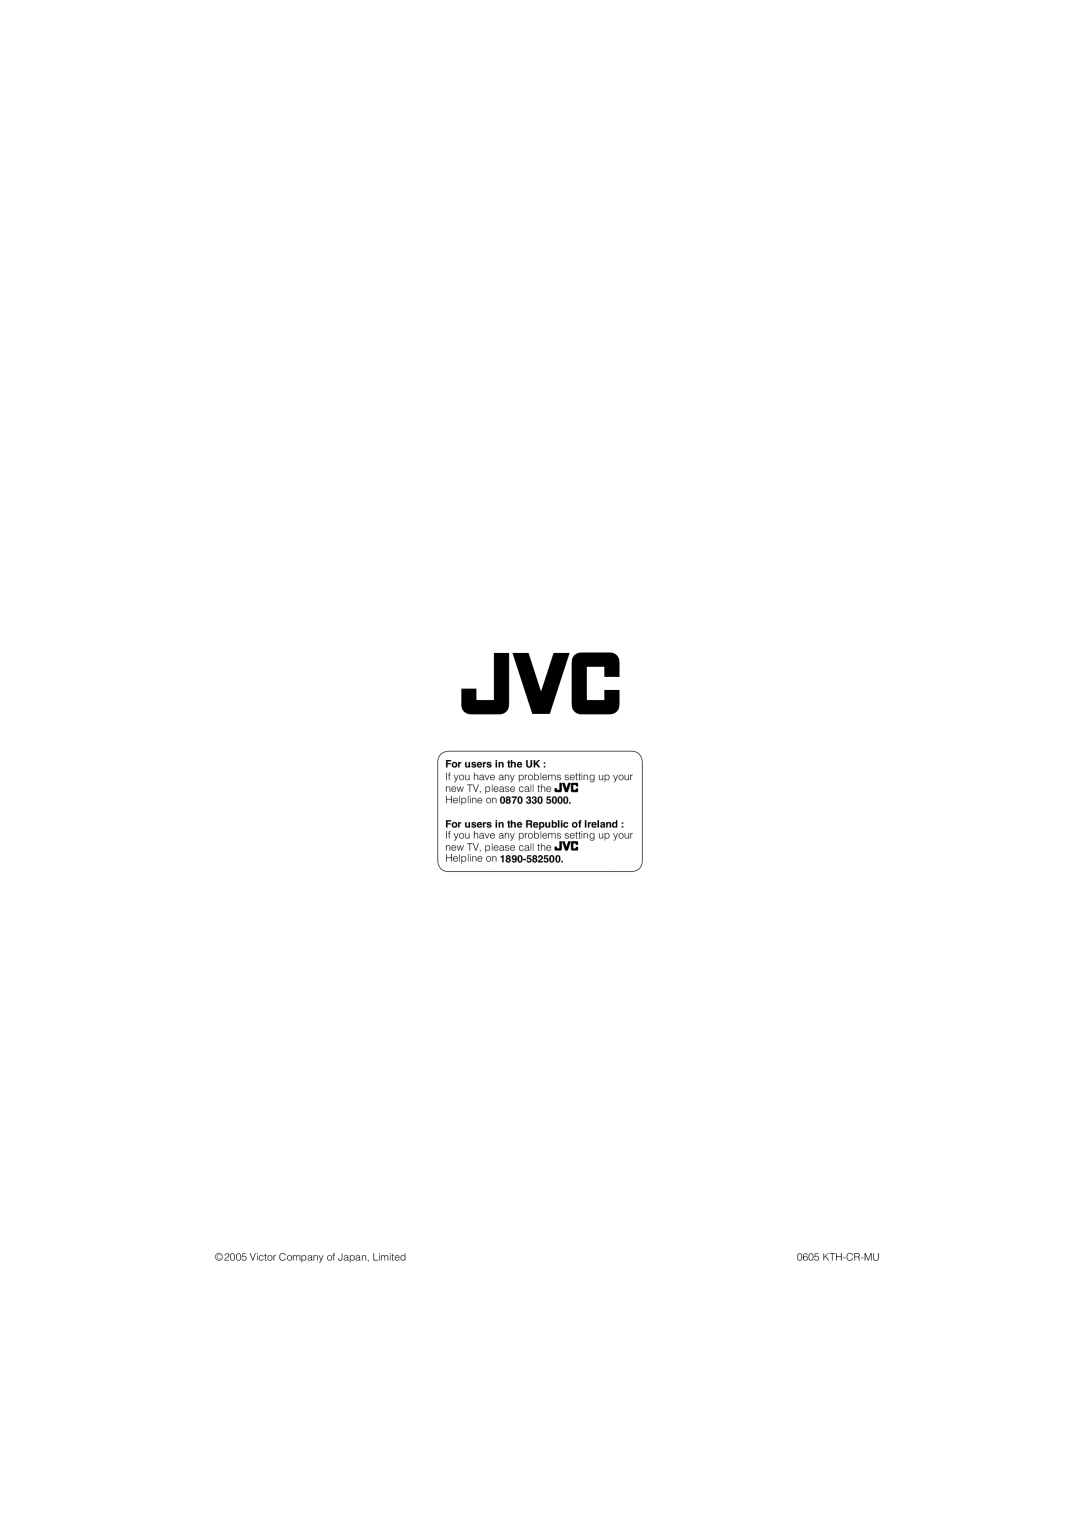 JVC LCT1847-001B-U For users in the UK, If you have any problems setting up your new TV, please call the, Helpline on 